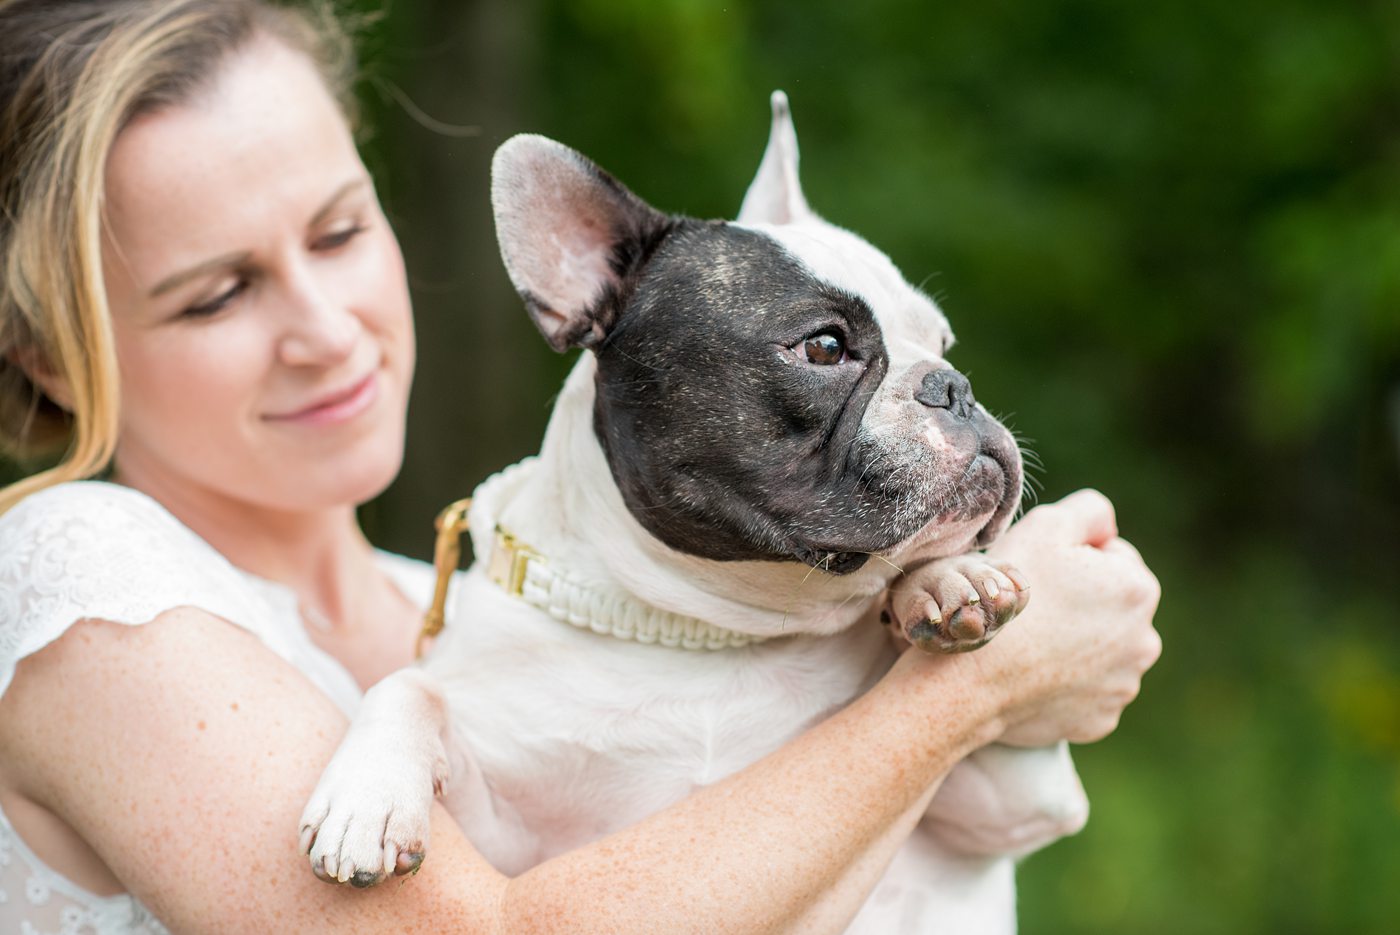 Saratoga Springs destination wedding photos in upstate New York by Mikkel Paige Photography, NY wedding photographer. The bride wore a boho lace gown for an intimate wedding at a home and had her terrior dog by her side. #mikkelpaige #saratogaspringswedding #destinationwedding #weddingdog